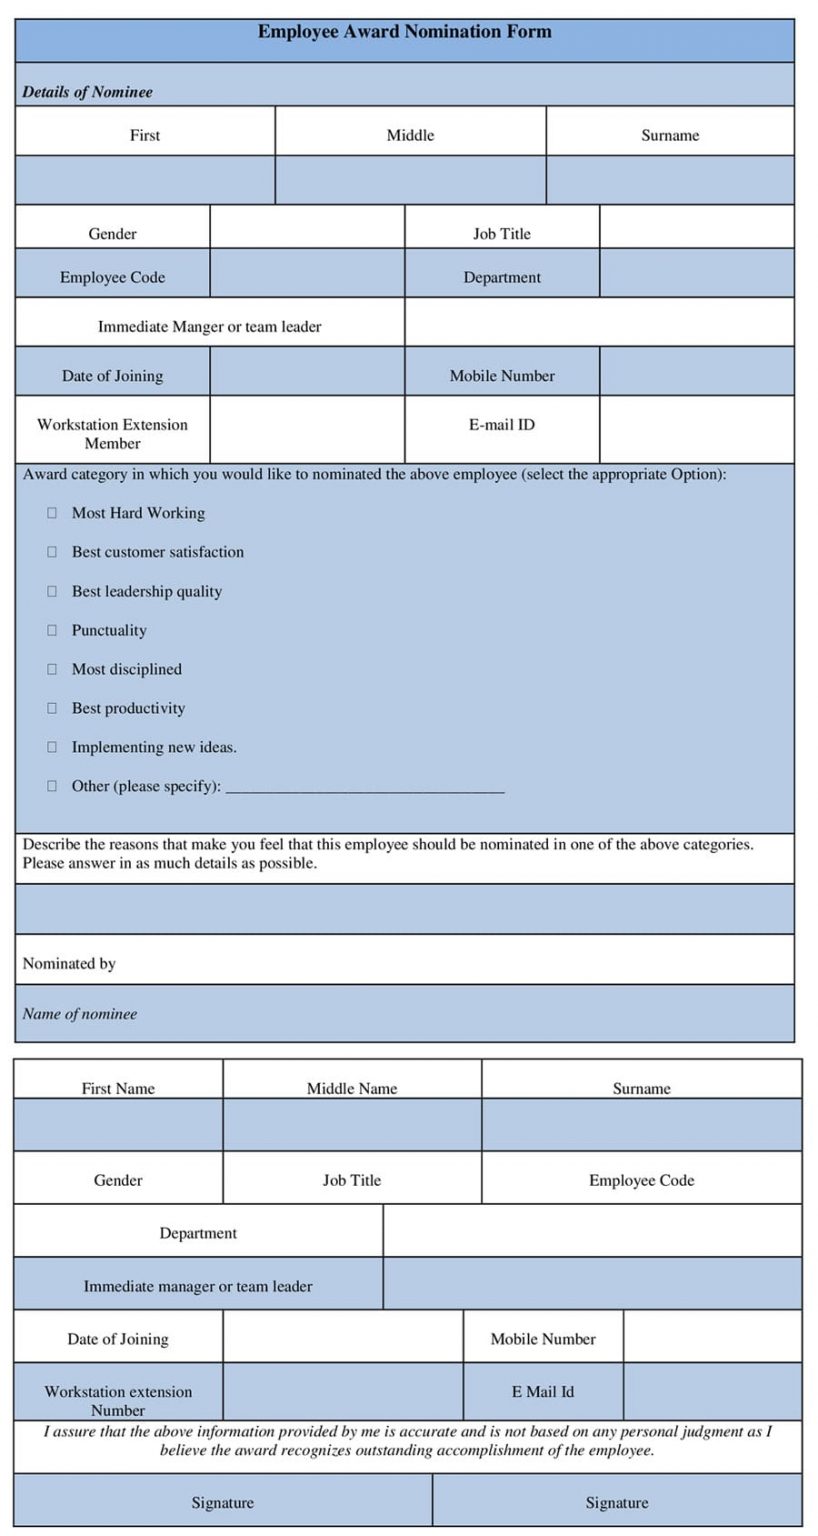 employee-award-nomination-form-template-in-word-format